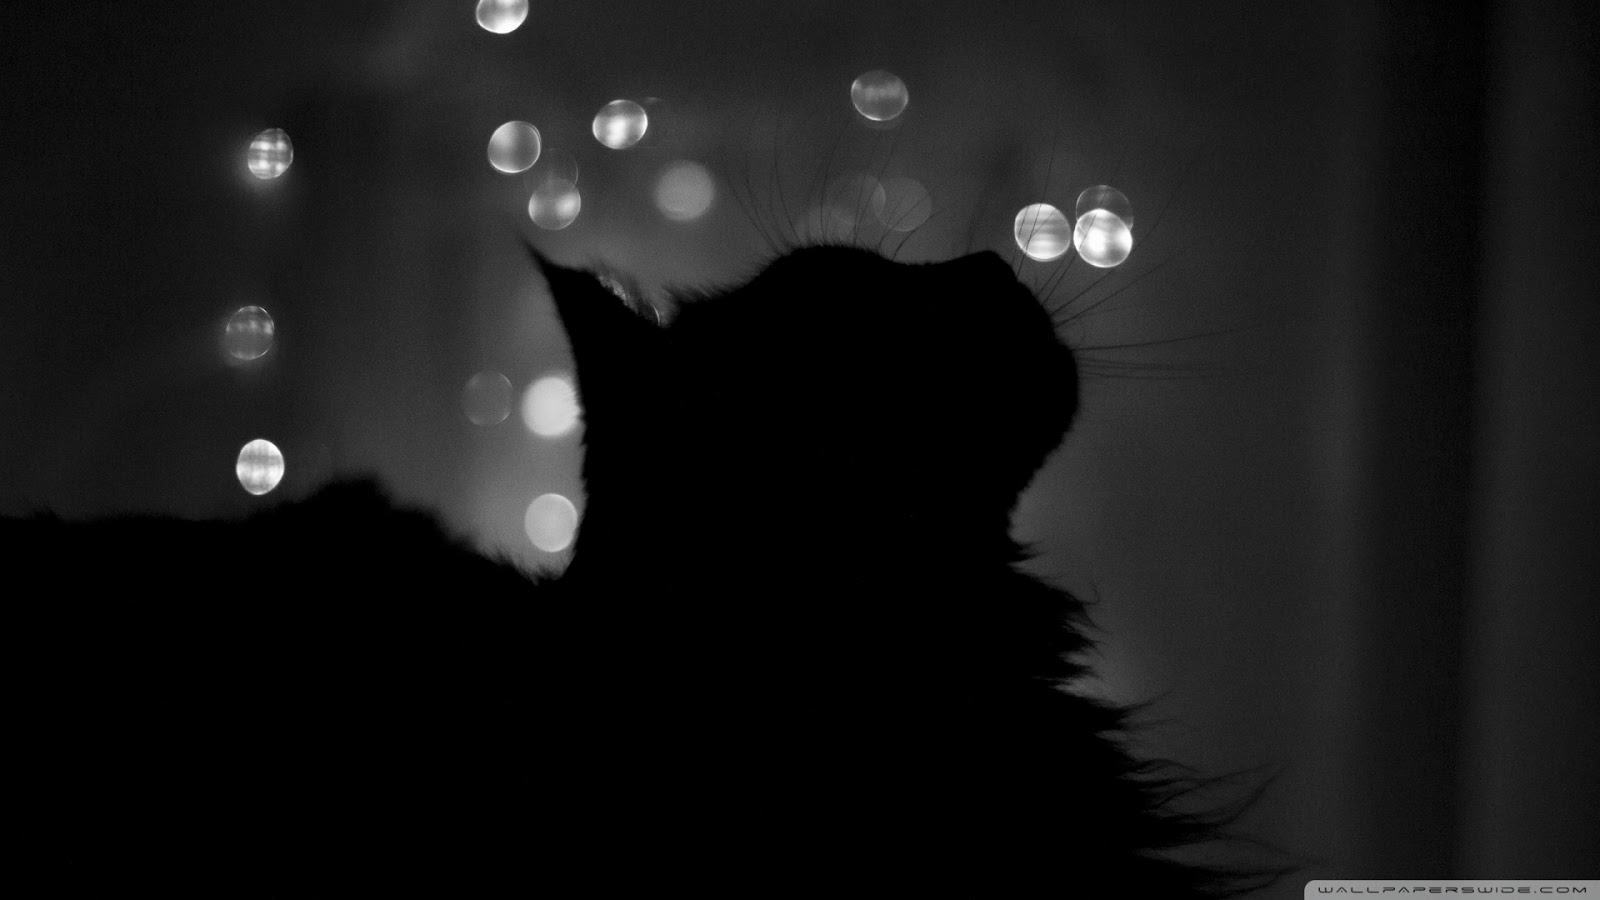 Black Cats HD Wallpapers Black Cats HD Wallpapers Check out the cool